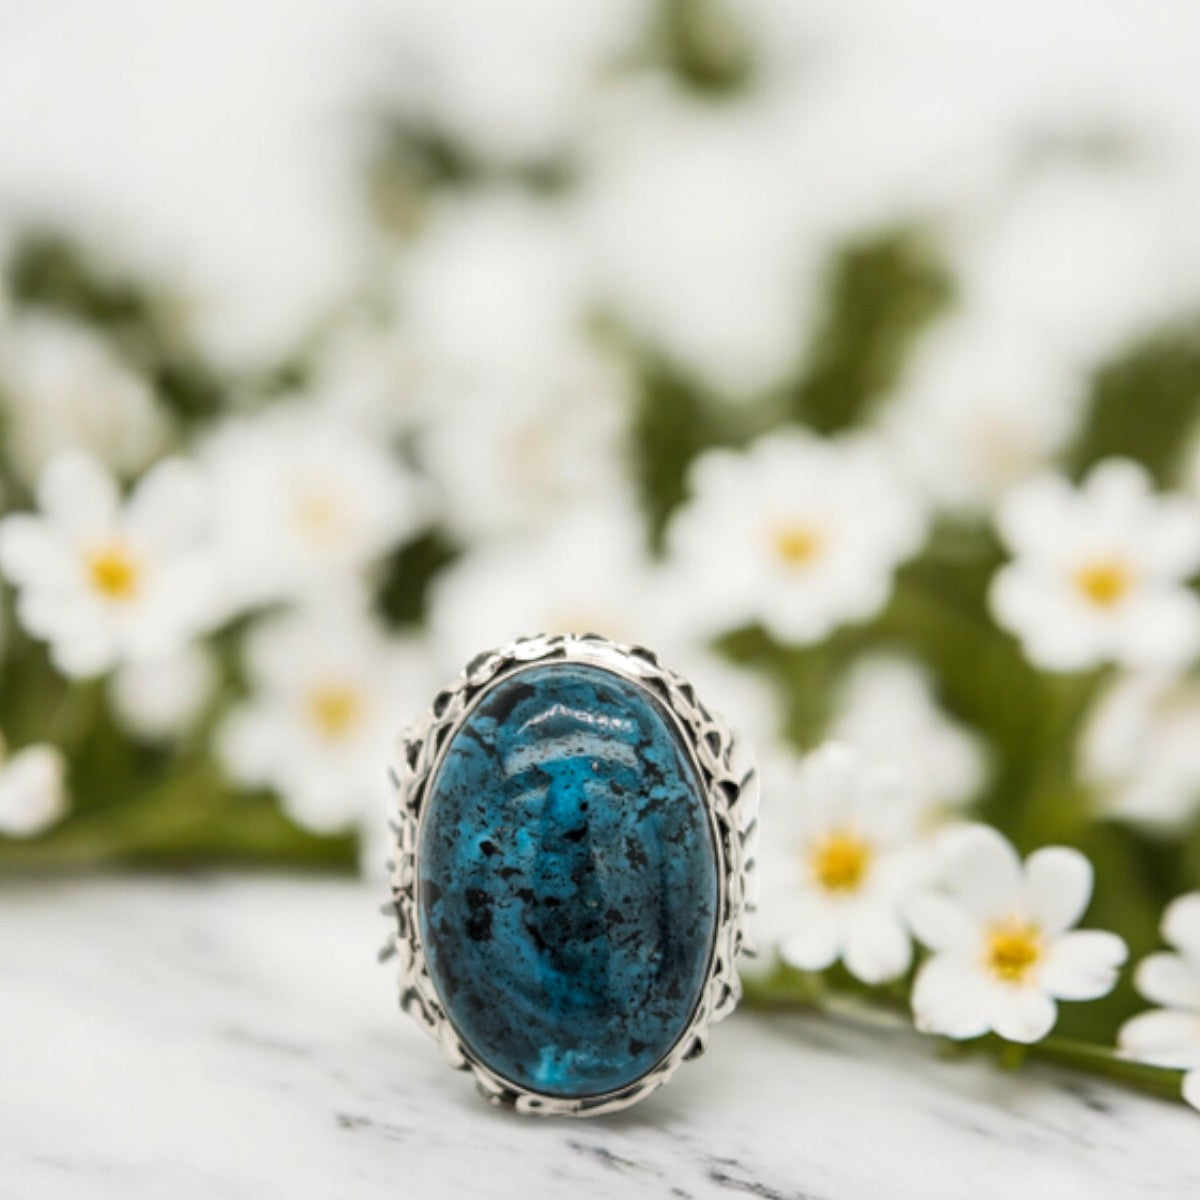 Vulture City's Gem | Sterling Silver & Bisbee Turquoise Ring by Rob Sherman